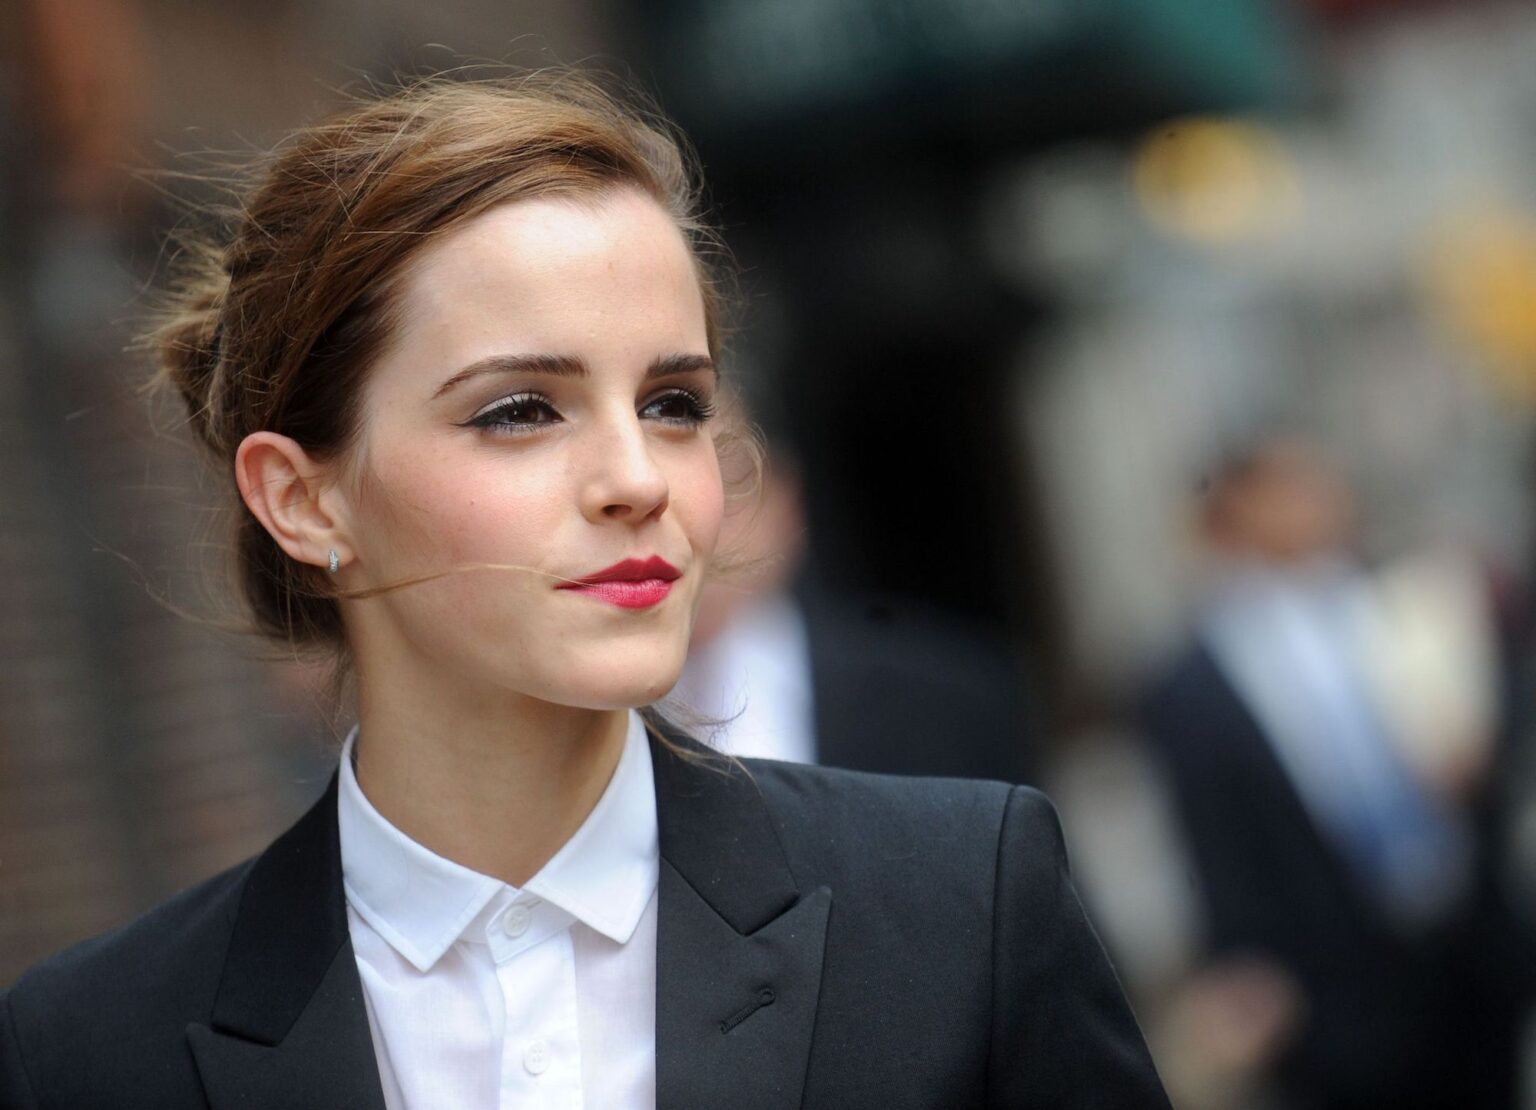 Is it true that Emma Watson of 'Harry Potter' fame was blacklisted from Hollywood? Let's find out.